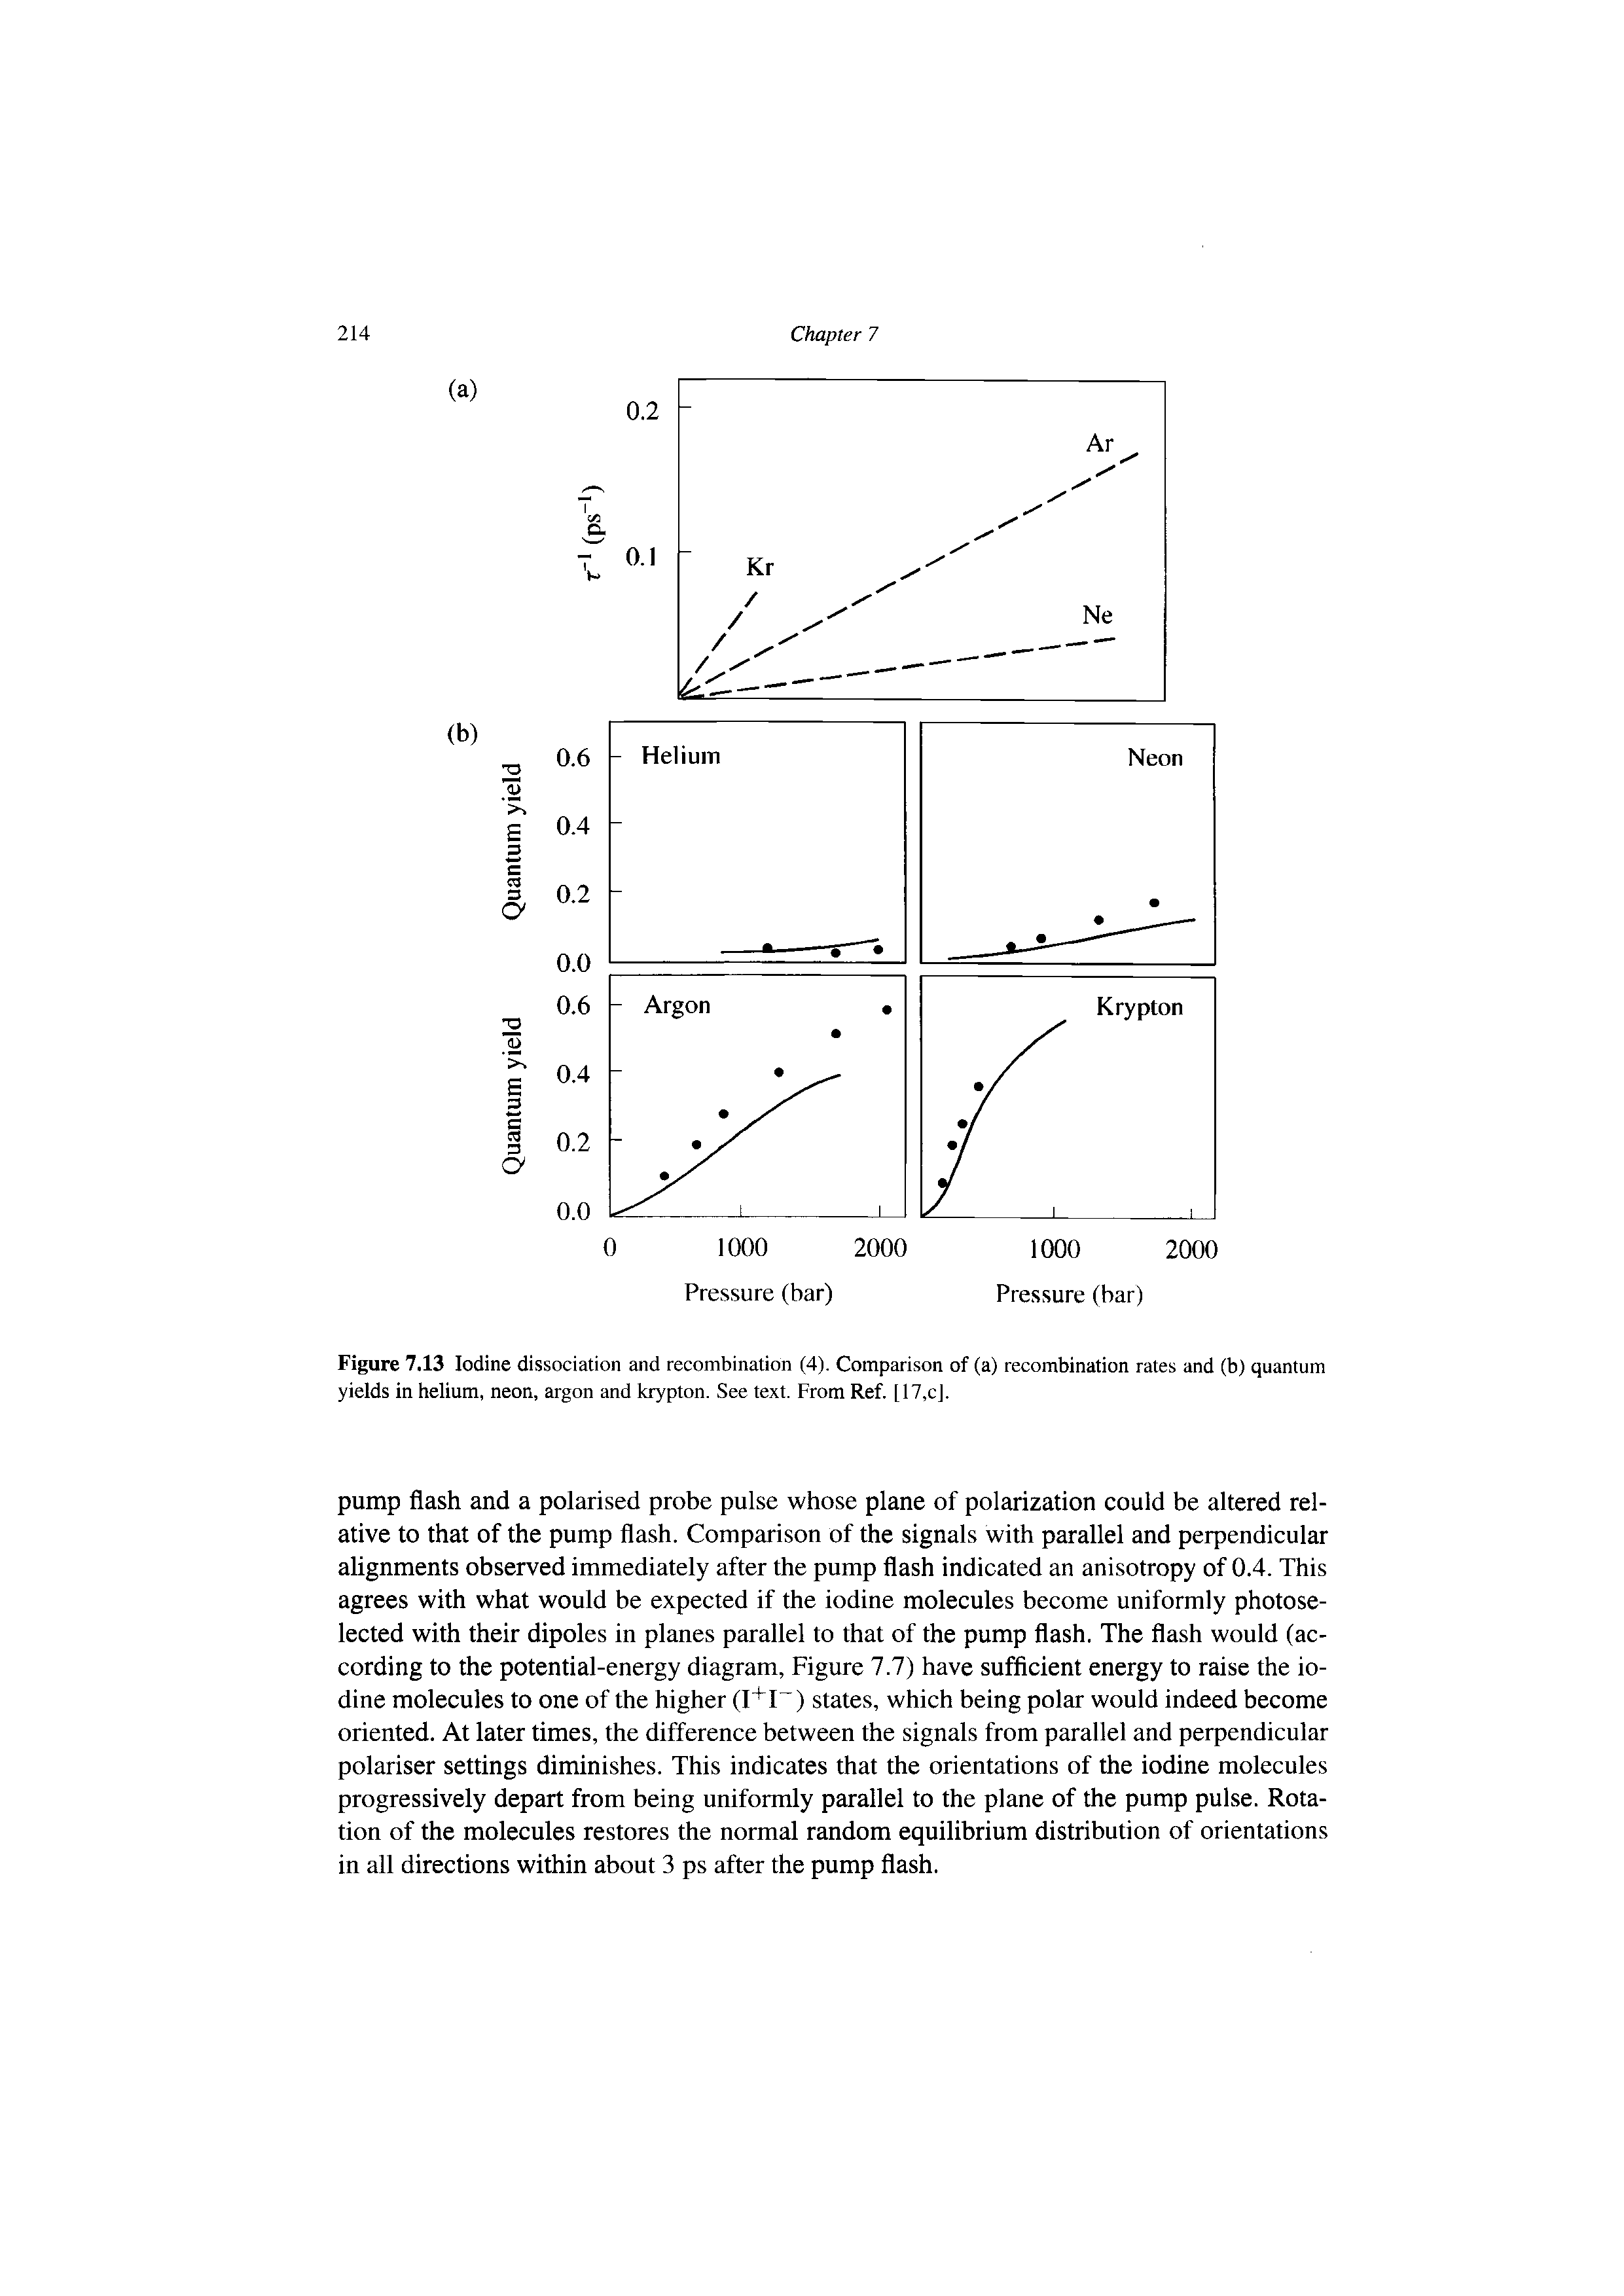 Figure 7.13 Iodine dissociation and recombination (4). Comparison of (a) recombination rates and (b) quantum yields in helium, neon, argon and krypton. See text. From Ref. [17,cJ.